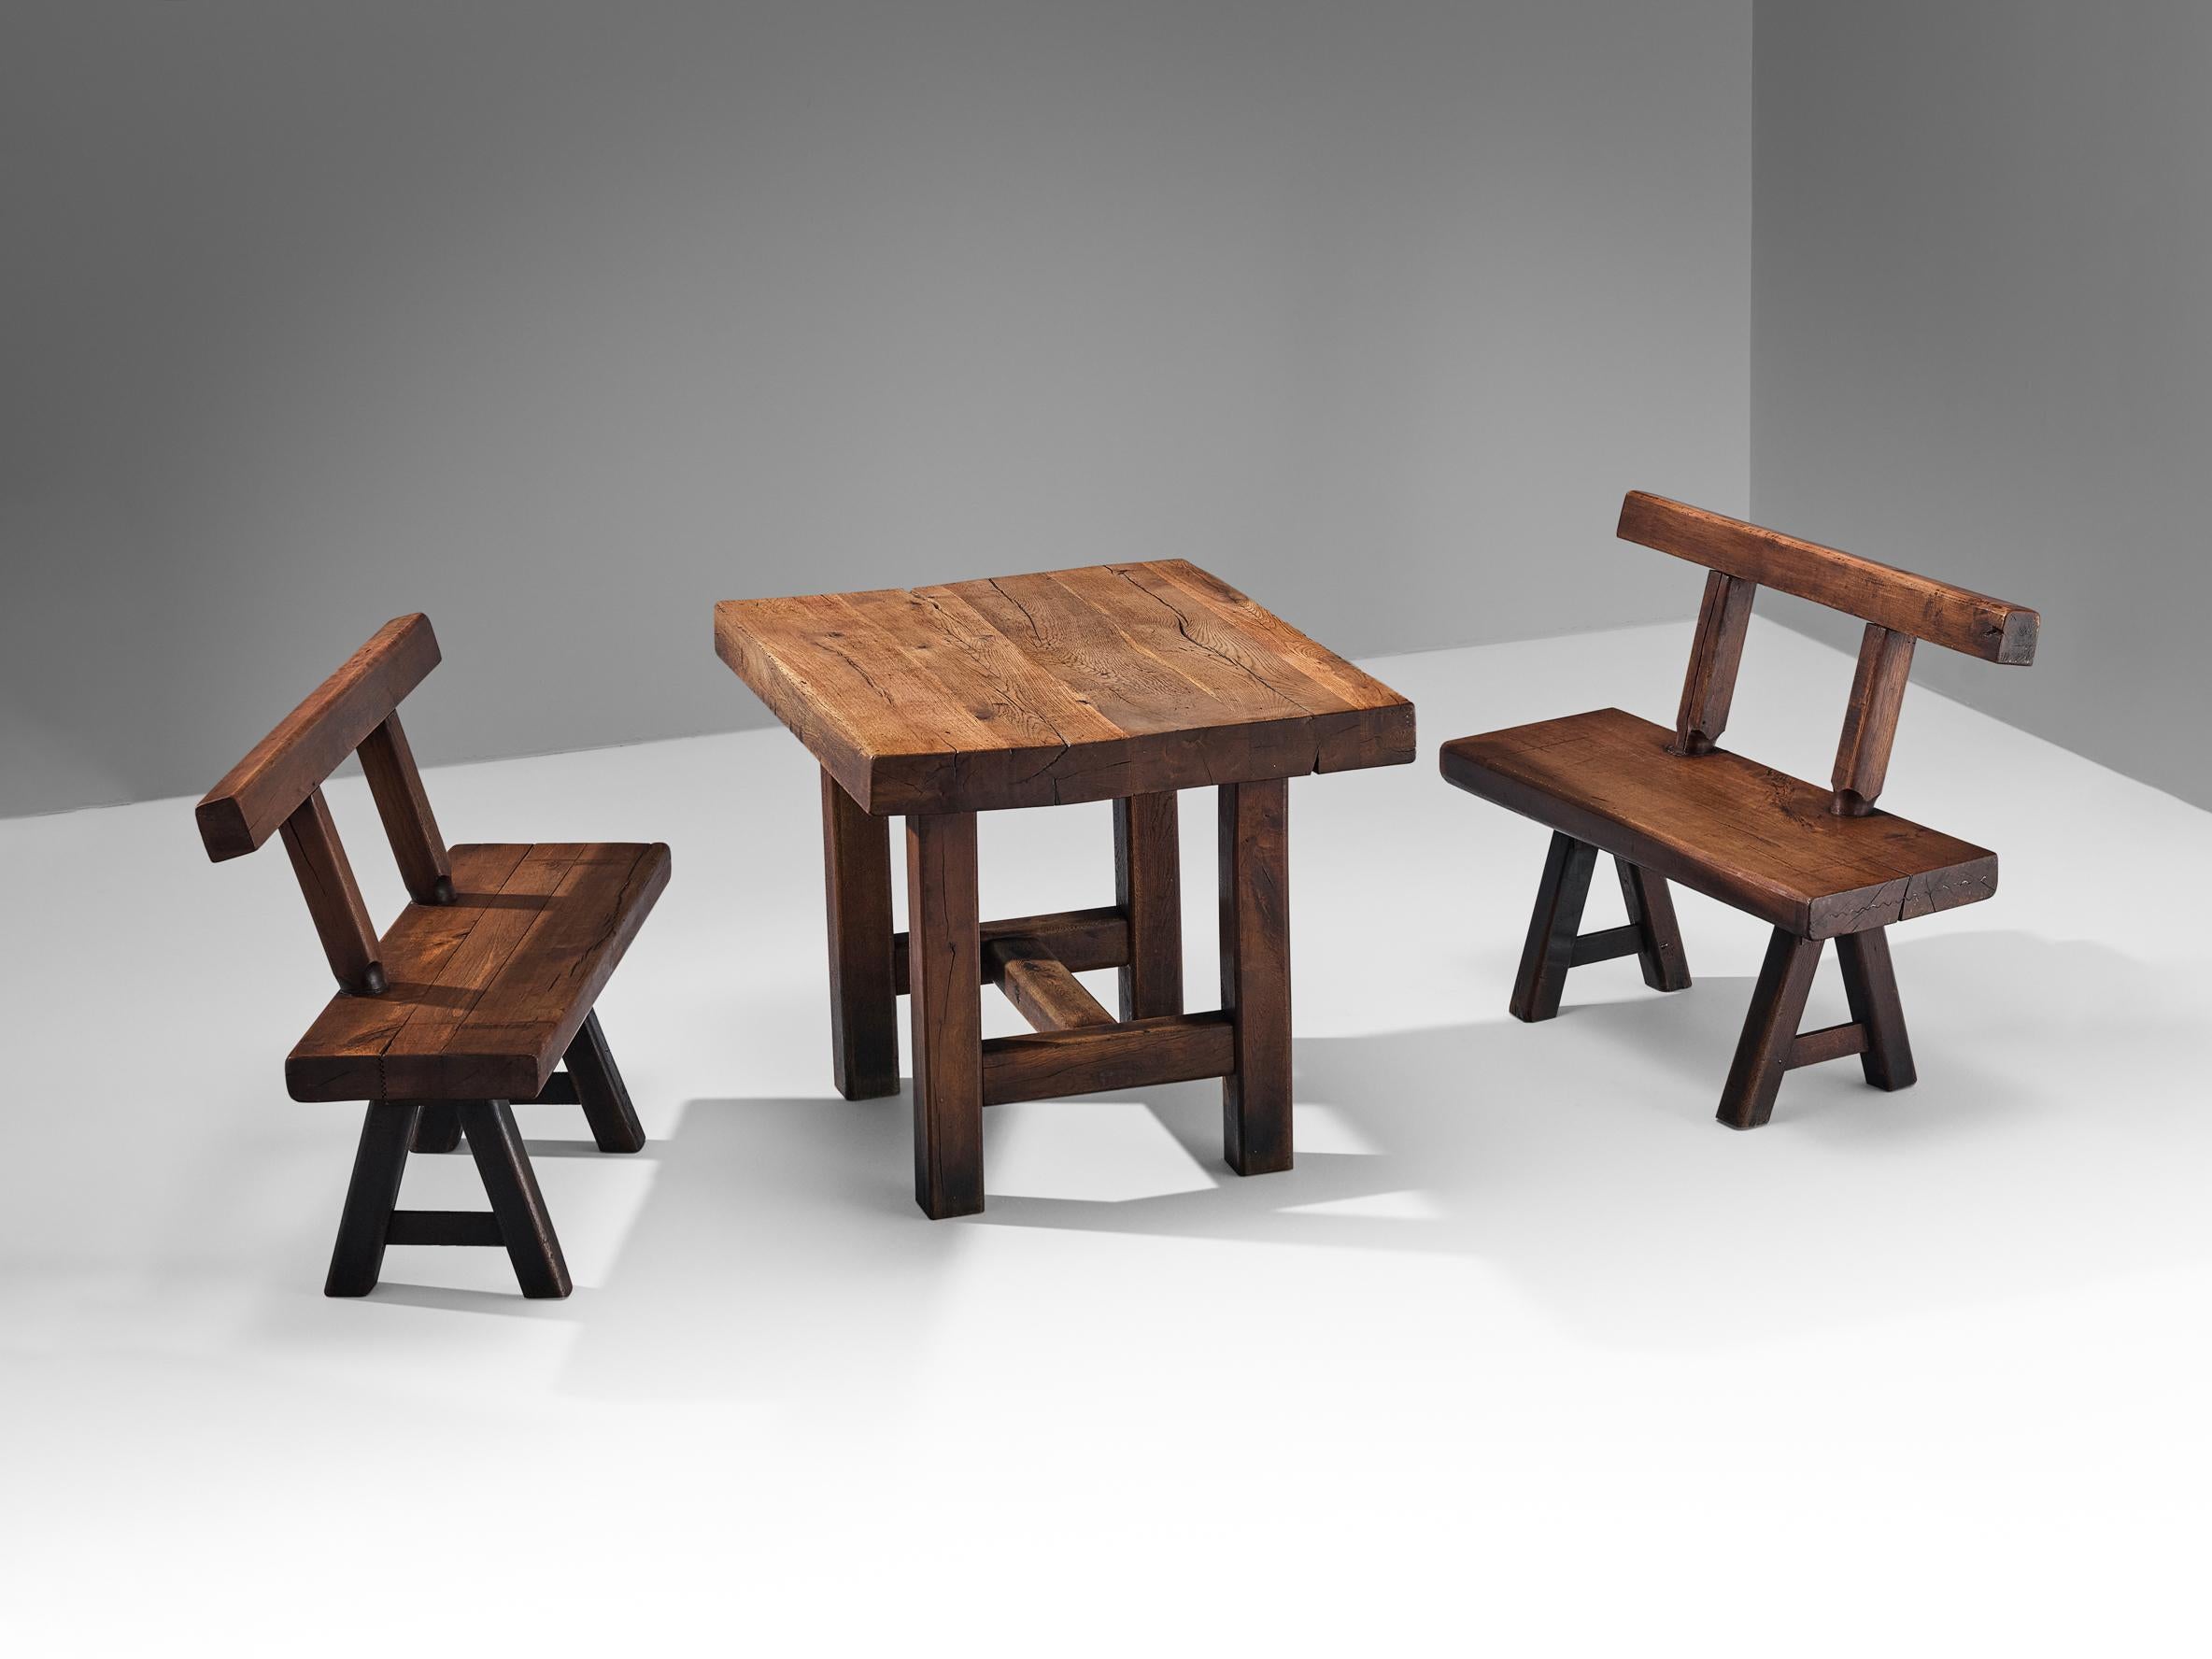 Mobichalet, set of dining table and a pair of benches, oak, beech, Belgium, 1950s.

This rustic dining set will come forward nicely in a relaxing atmosphere, like a patio or a studio space. The Brutalist appearance is expressed through robust